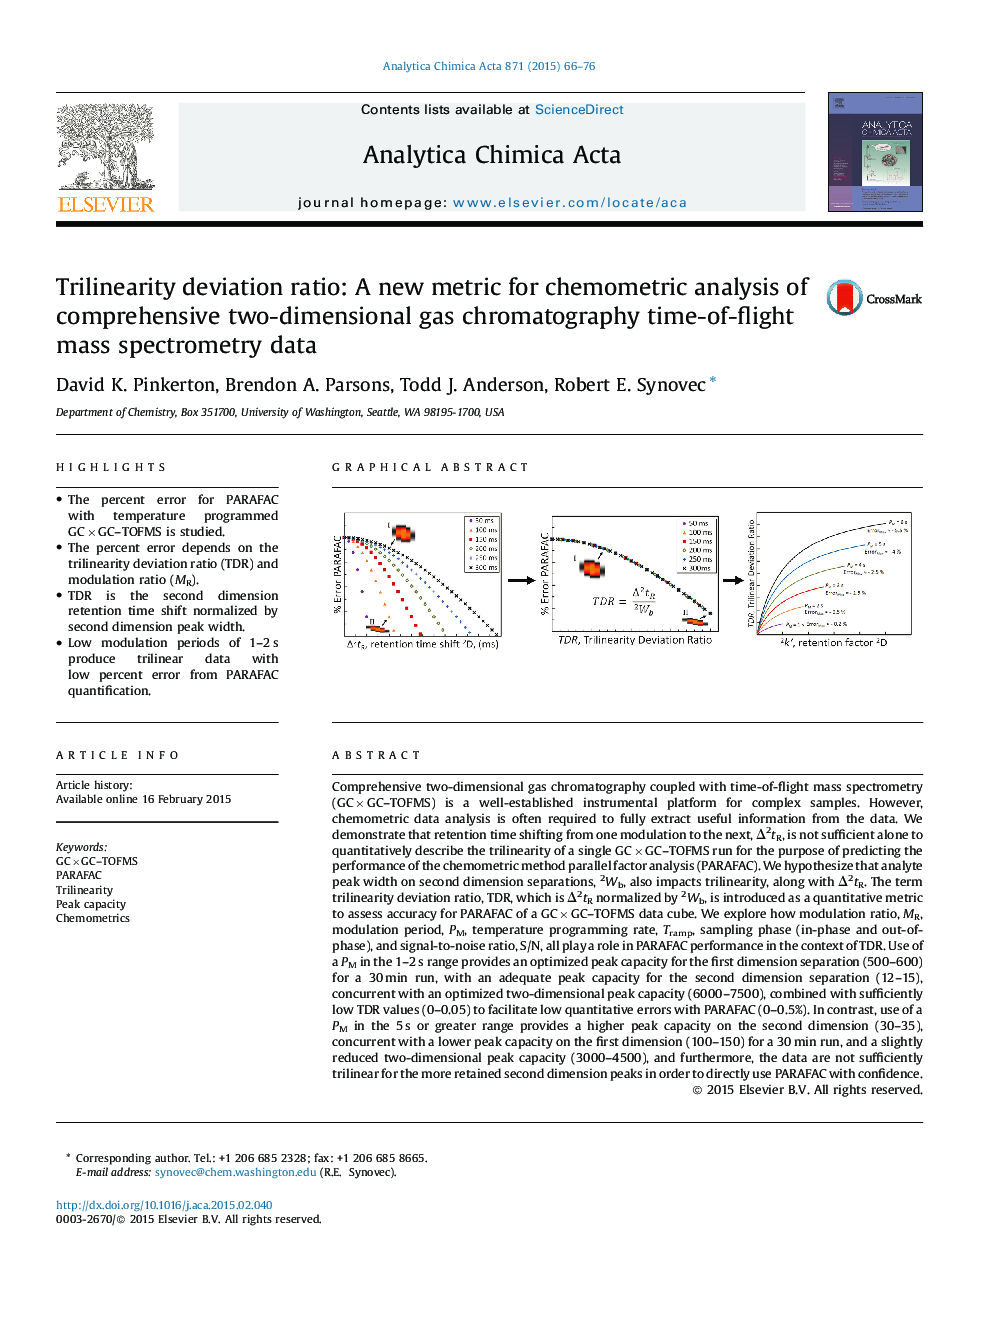 Trilinearity deviation ratio: A new metric for chemometric analysis of comprehensive two-dimensional gas chromatography time-of-flight mass spectrometry data